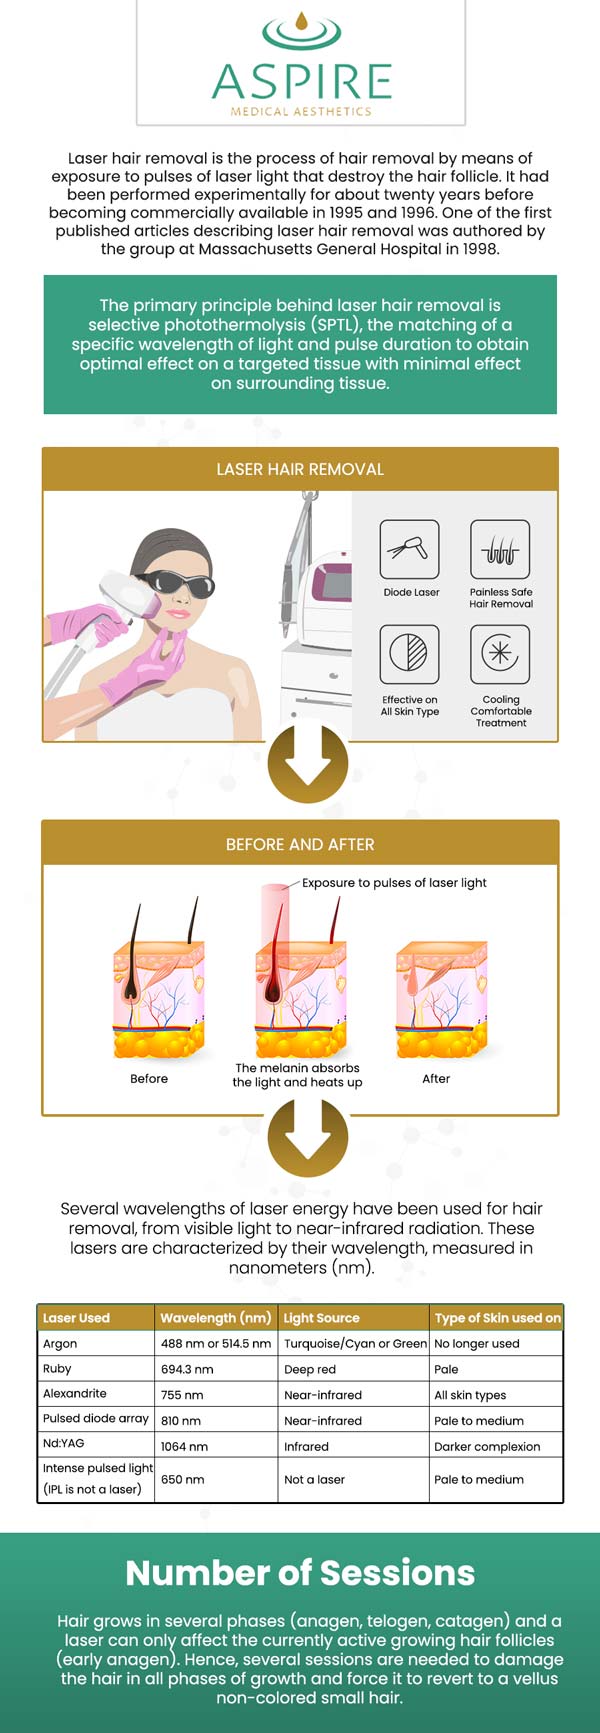 Common questions asked by clients: What is DiolazXL? Does diolaze hair removal work? How long does diolaze laser hair removal last?

DiolazeXL is an advanced laser hair removal treatment that removes unwanted hair effectively and softly. At Aspire Medical Aesthetics, Dr. Eugene J. Liu, M.D., and his team of aesthetic professionals offer Diolazex laser hair removal. For more information, contact us or request an appointment online. We have convenient locations to serve you in Scarsdale NY, and New York, NY. We serve clients from Scarsdale NY, New York, NY, Glendale Queens NY, Irvington NY, Larchmont NY, Rye Brook NY, Brooklyn NY, Canarsie NY, and surrounding areas.